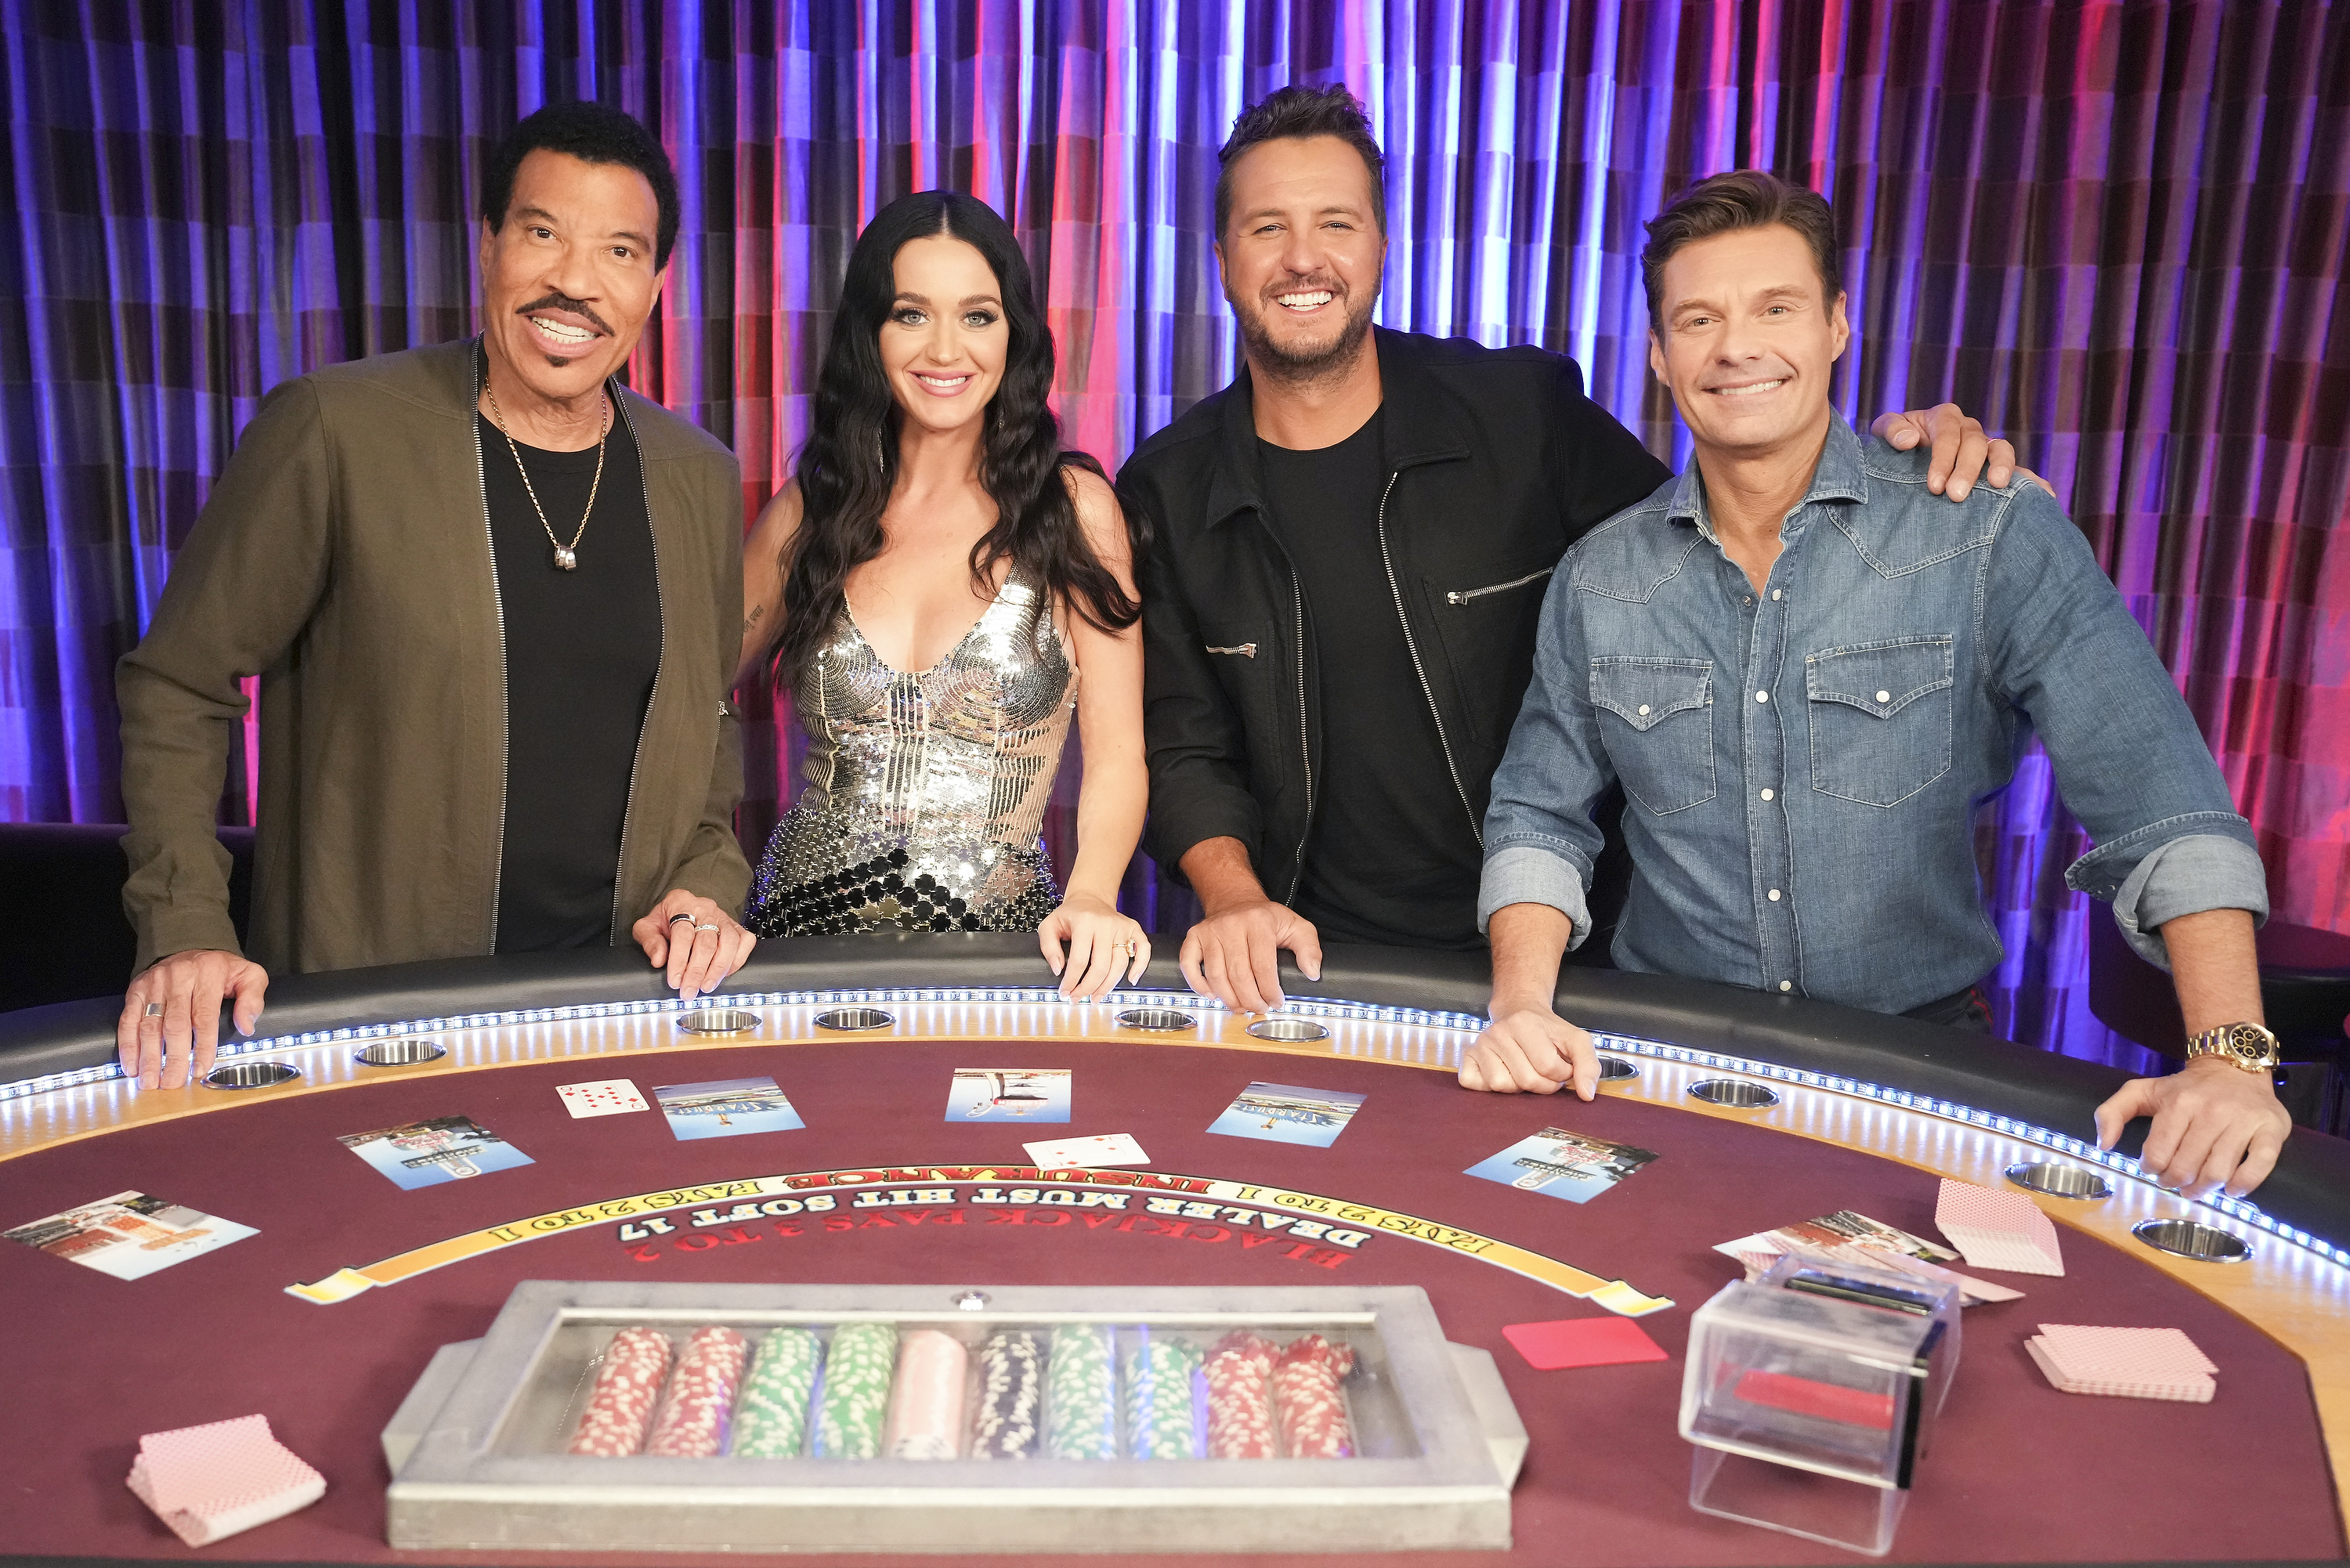 Luke Bryan pictured with Lionel Richie, Katy Perry, and Ryan Seacrest